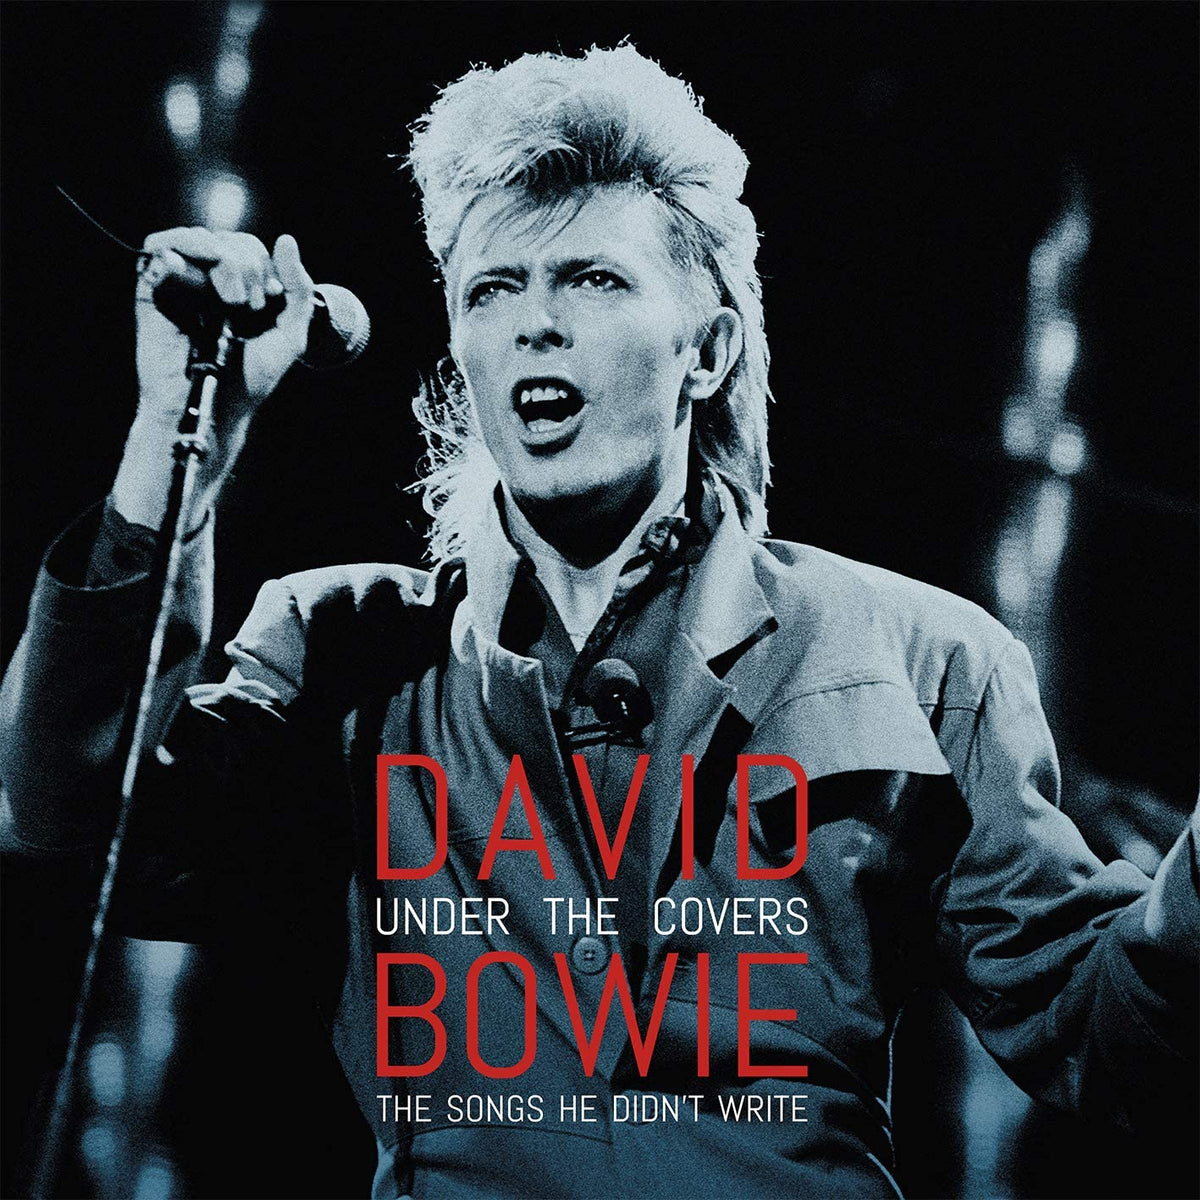 Under the Covers: The Songs He Didn't Write - David Bowie [VINYL Limited Edition]